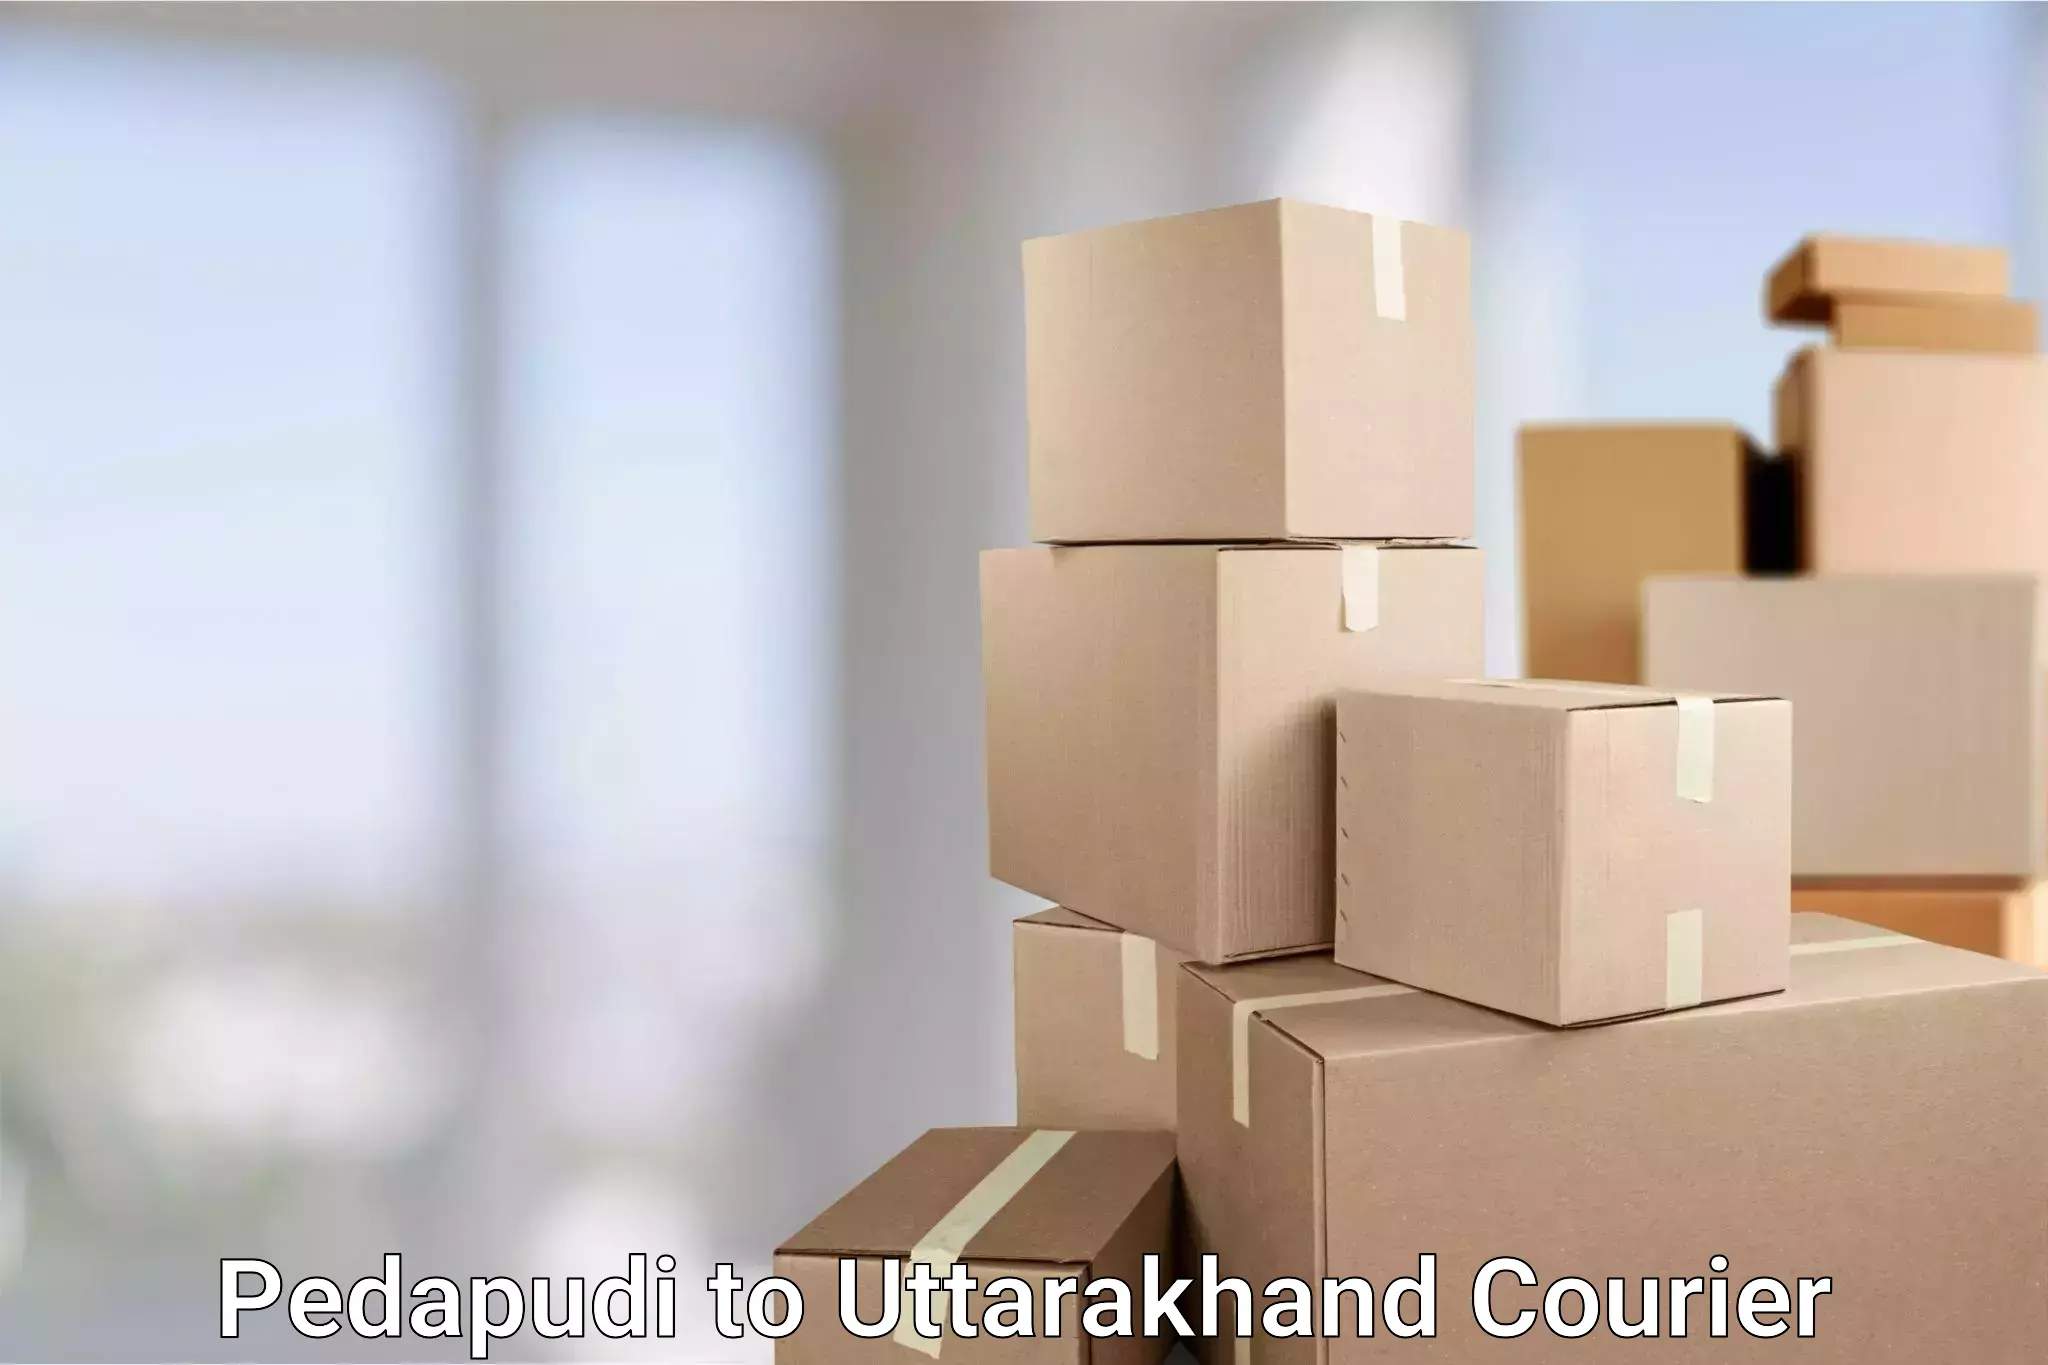 Online package tracking Pedapudi to Champawat